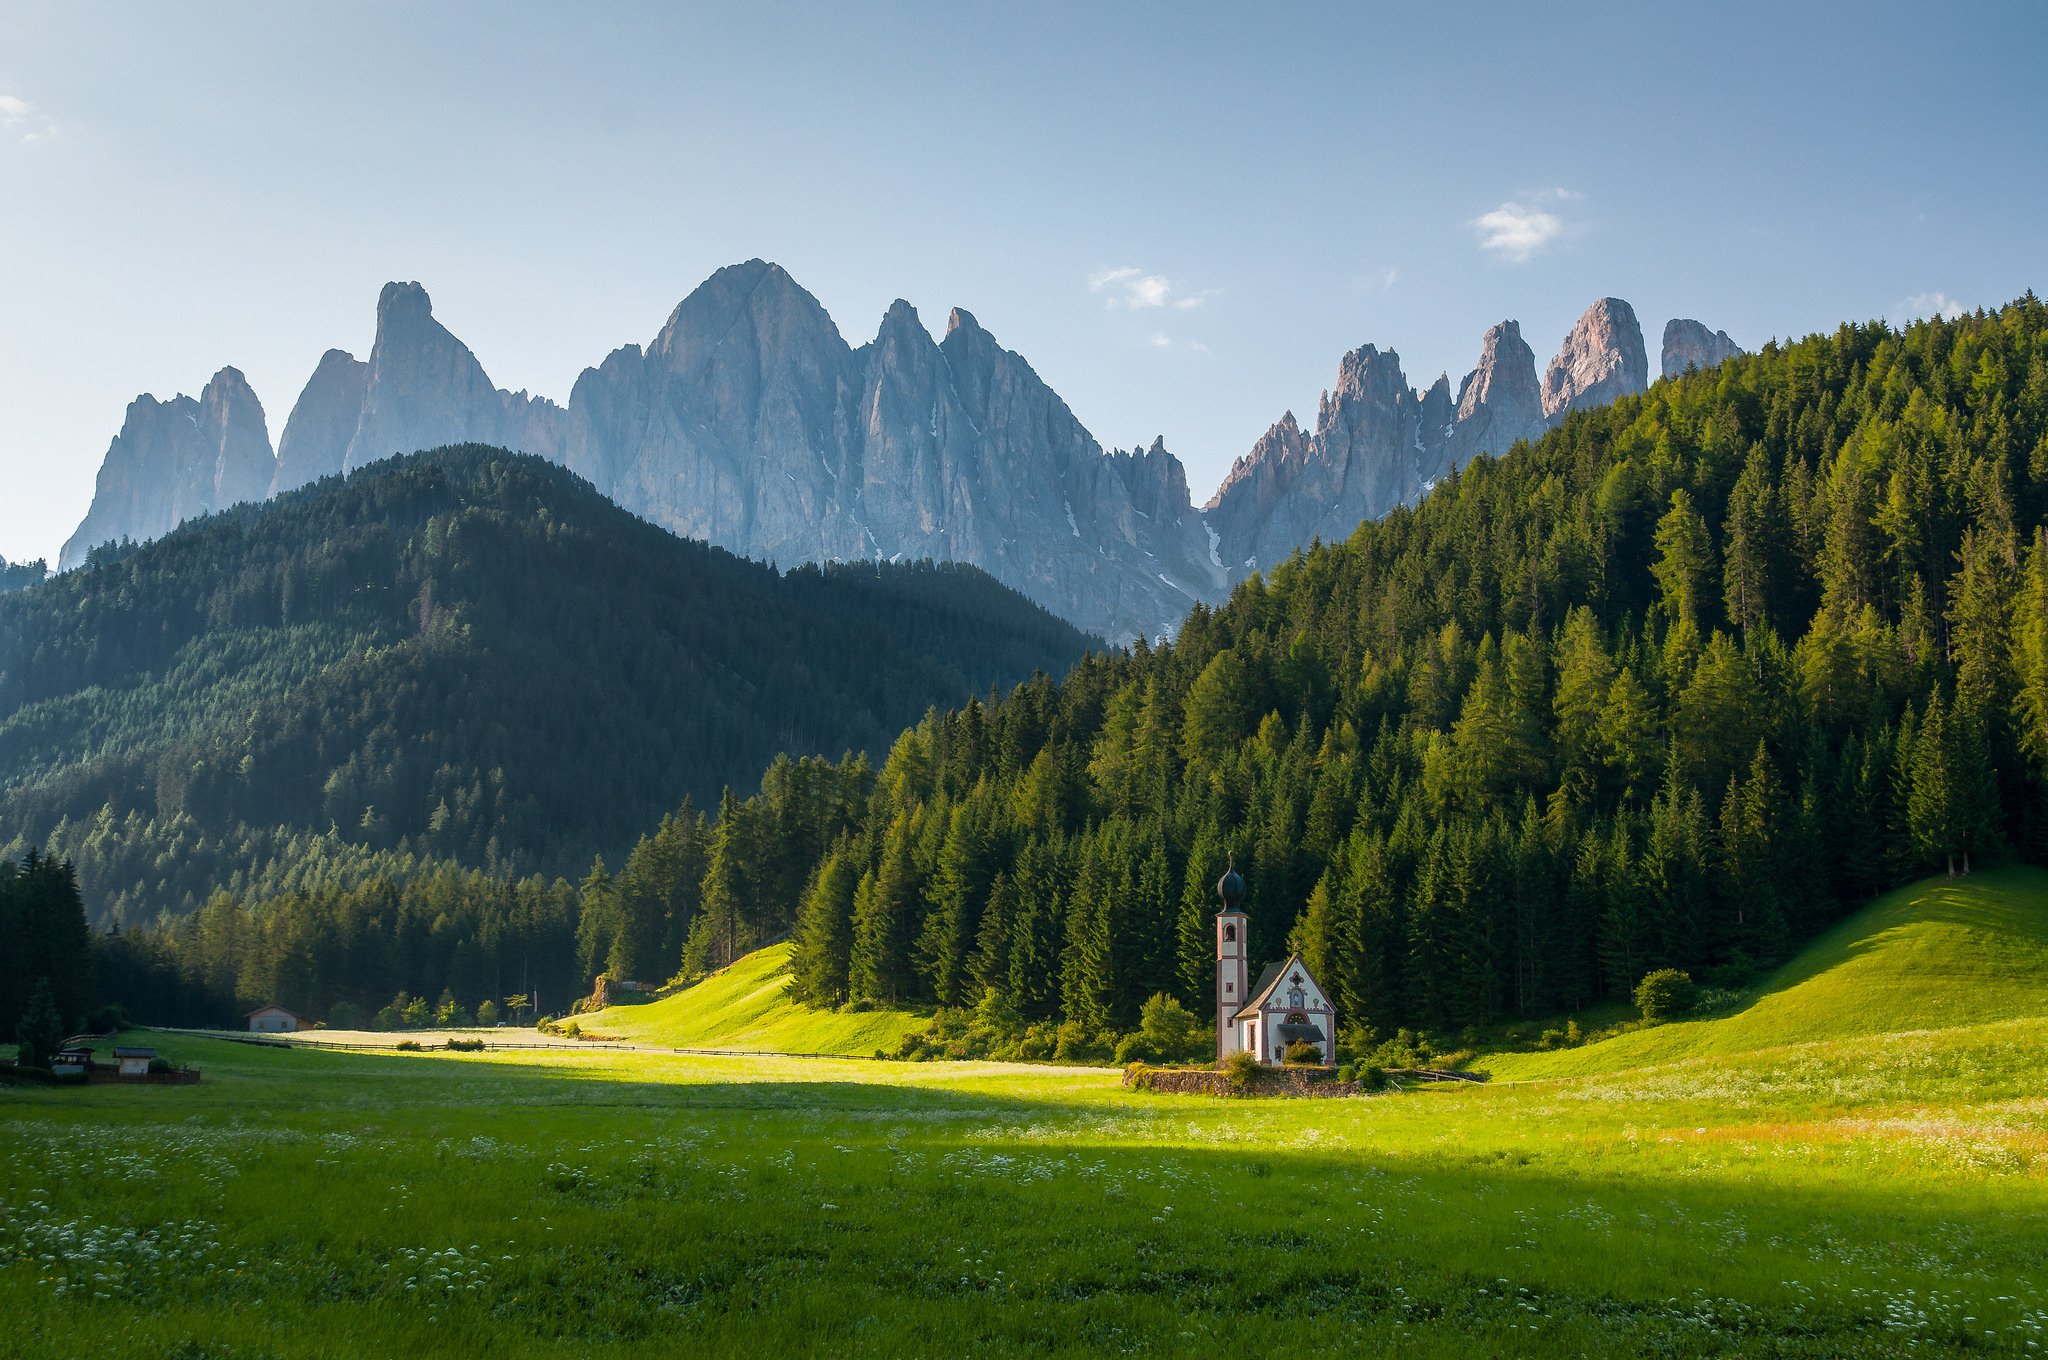 alps, Dolomite, Alps, Alps, Mountains, Forest, Trees, Church, Meadow, Grass, Flowers, Houses, Landscape, Nature Wallpaper